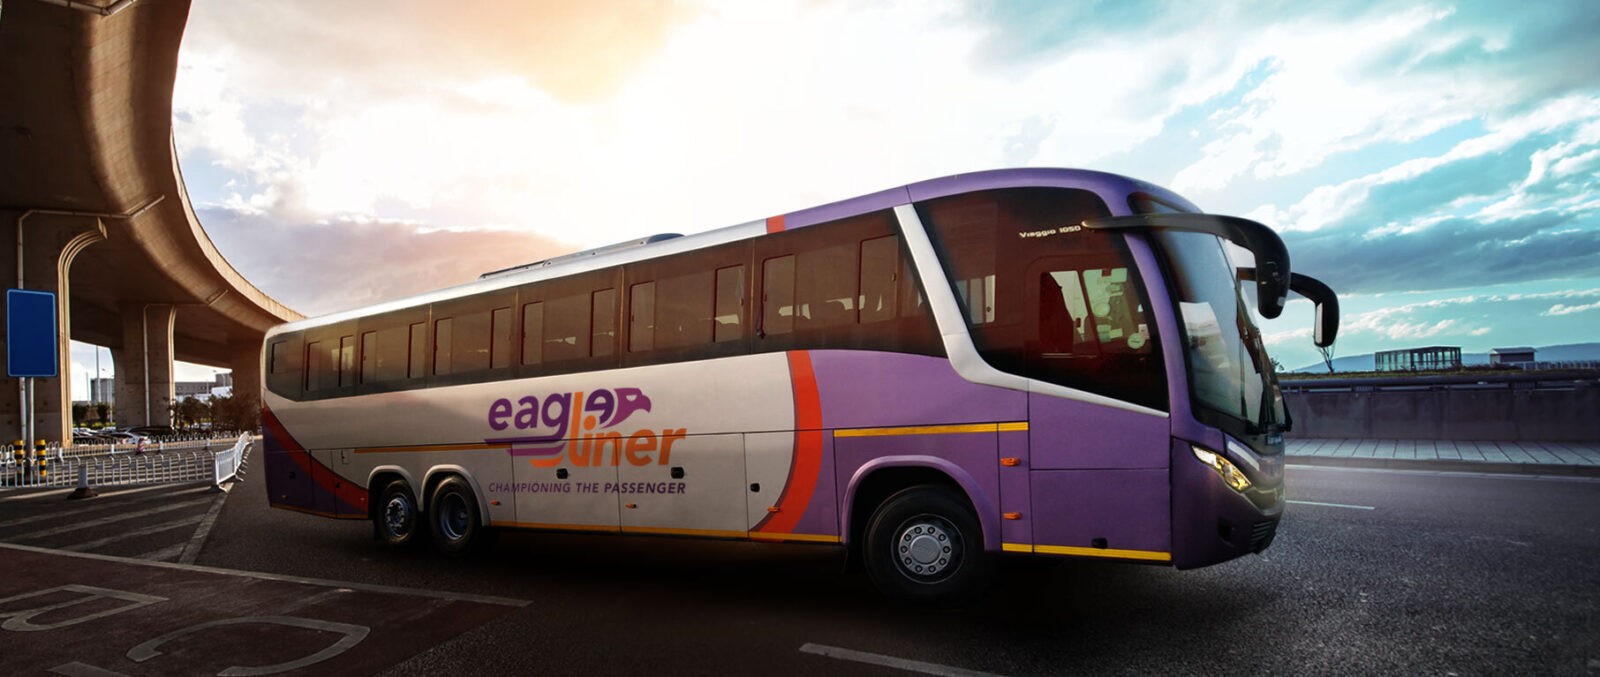 Eagle Liner South Africa Booking: Secure Your Seats Today for a Memorable Journey!